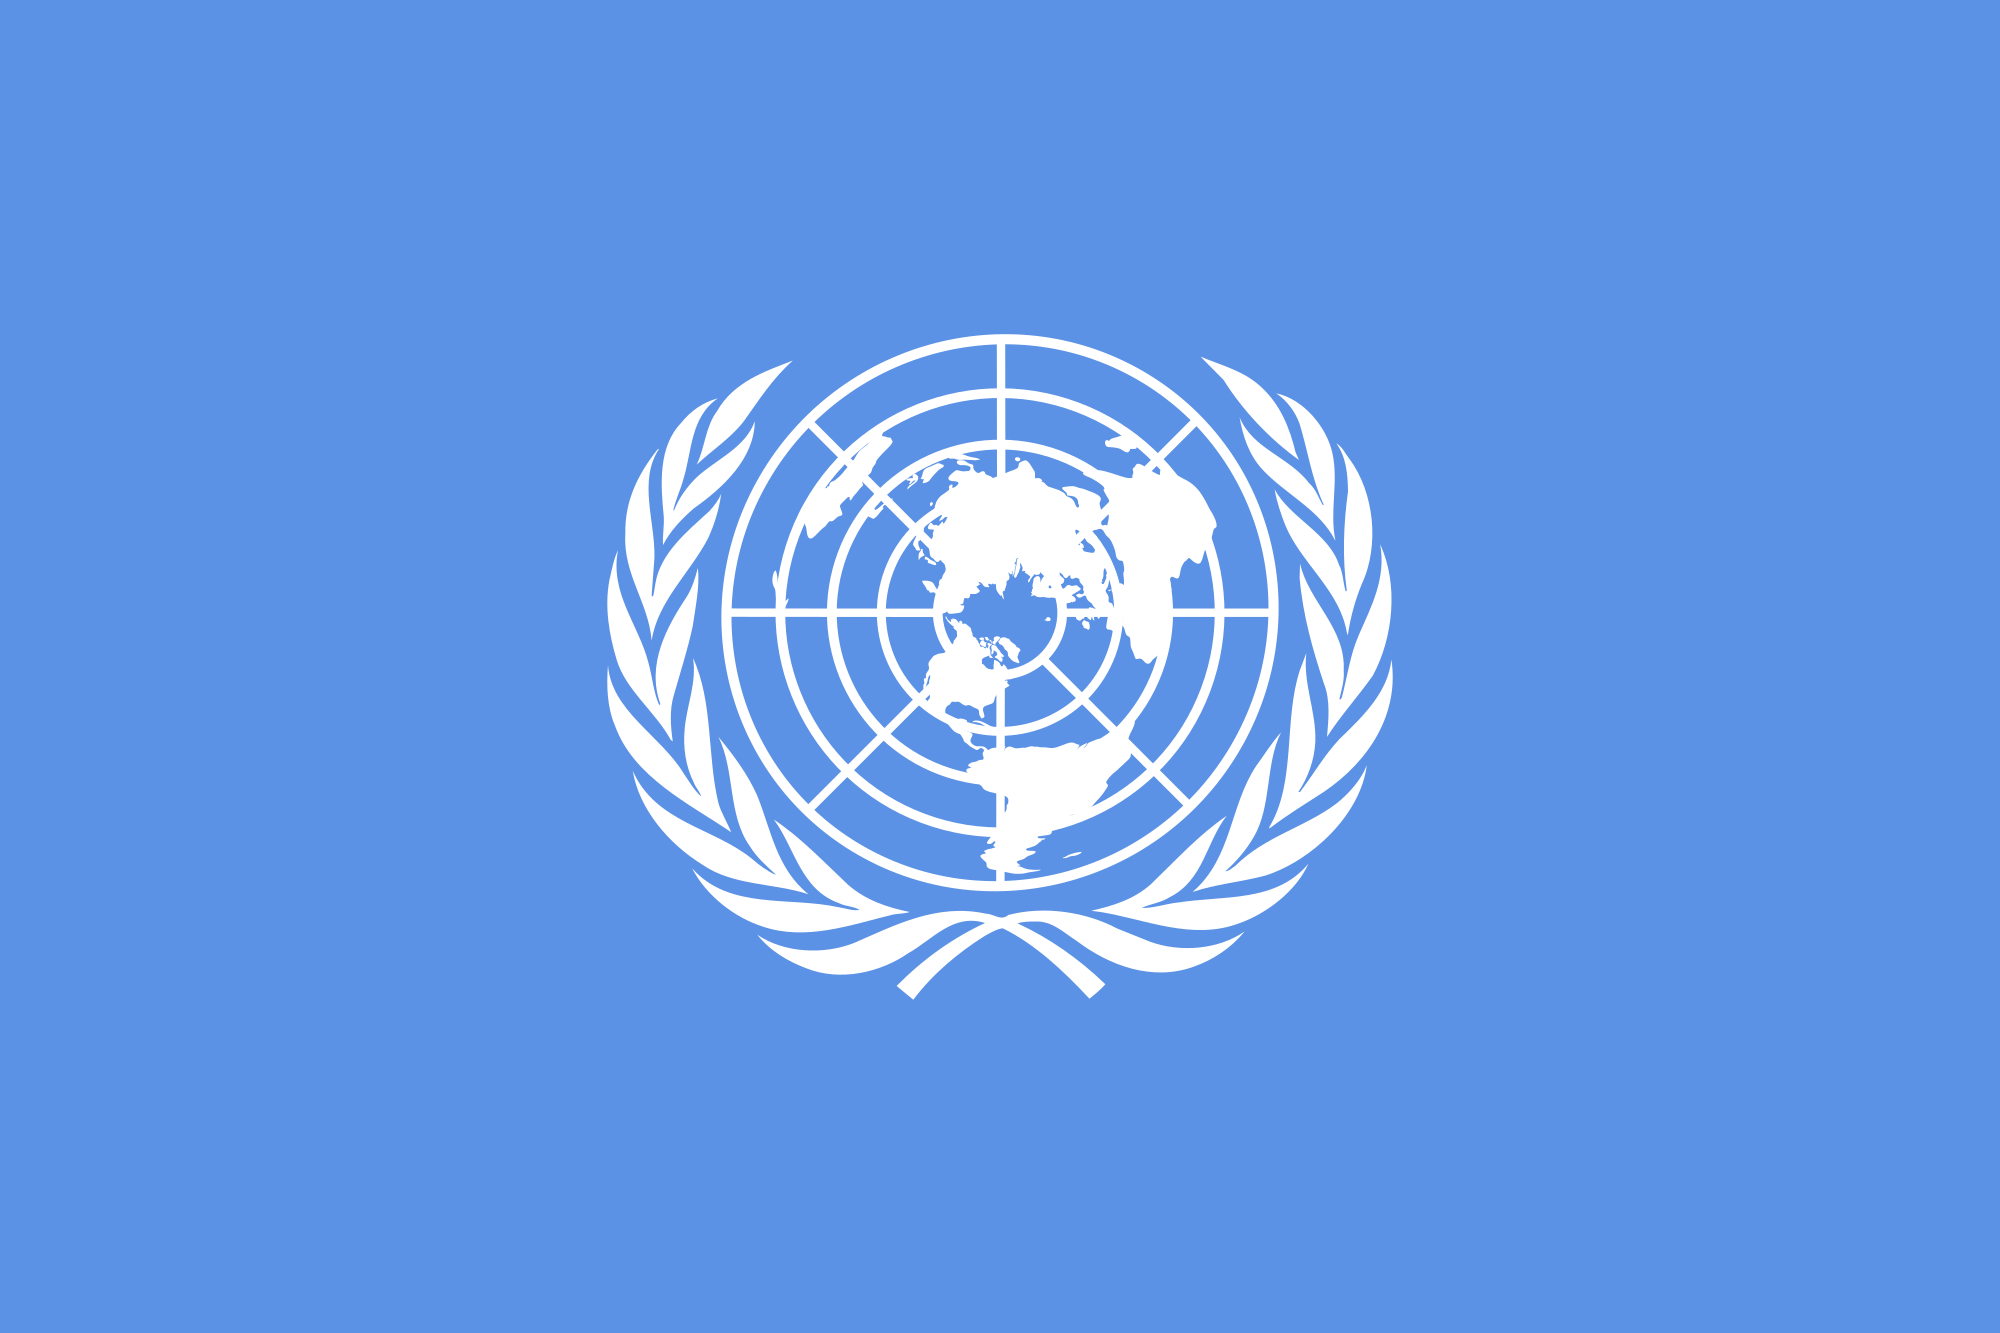 Branches with Globe Logo - Flag of the United Nations